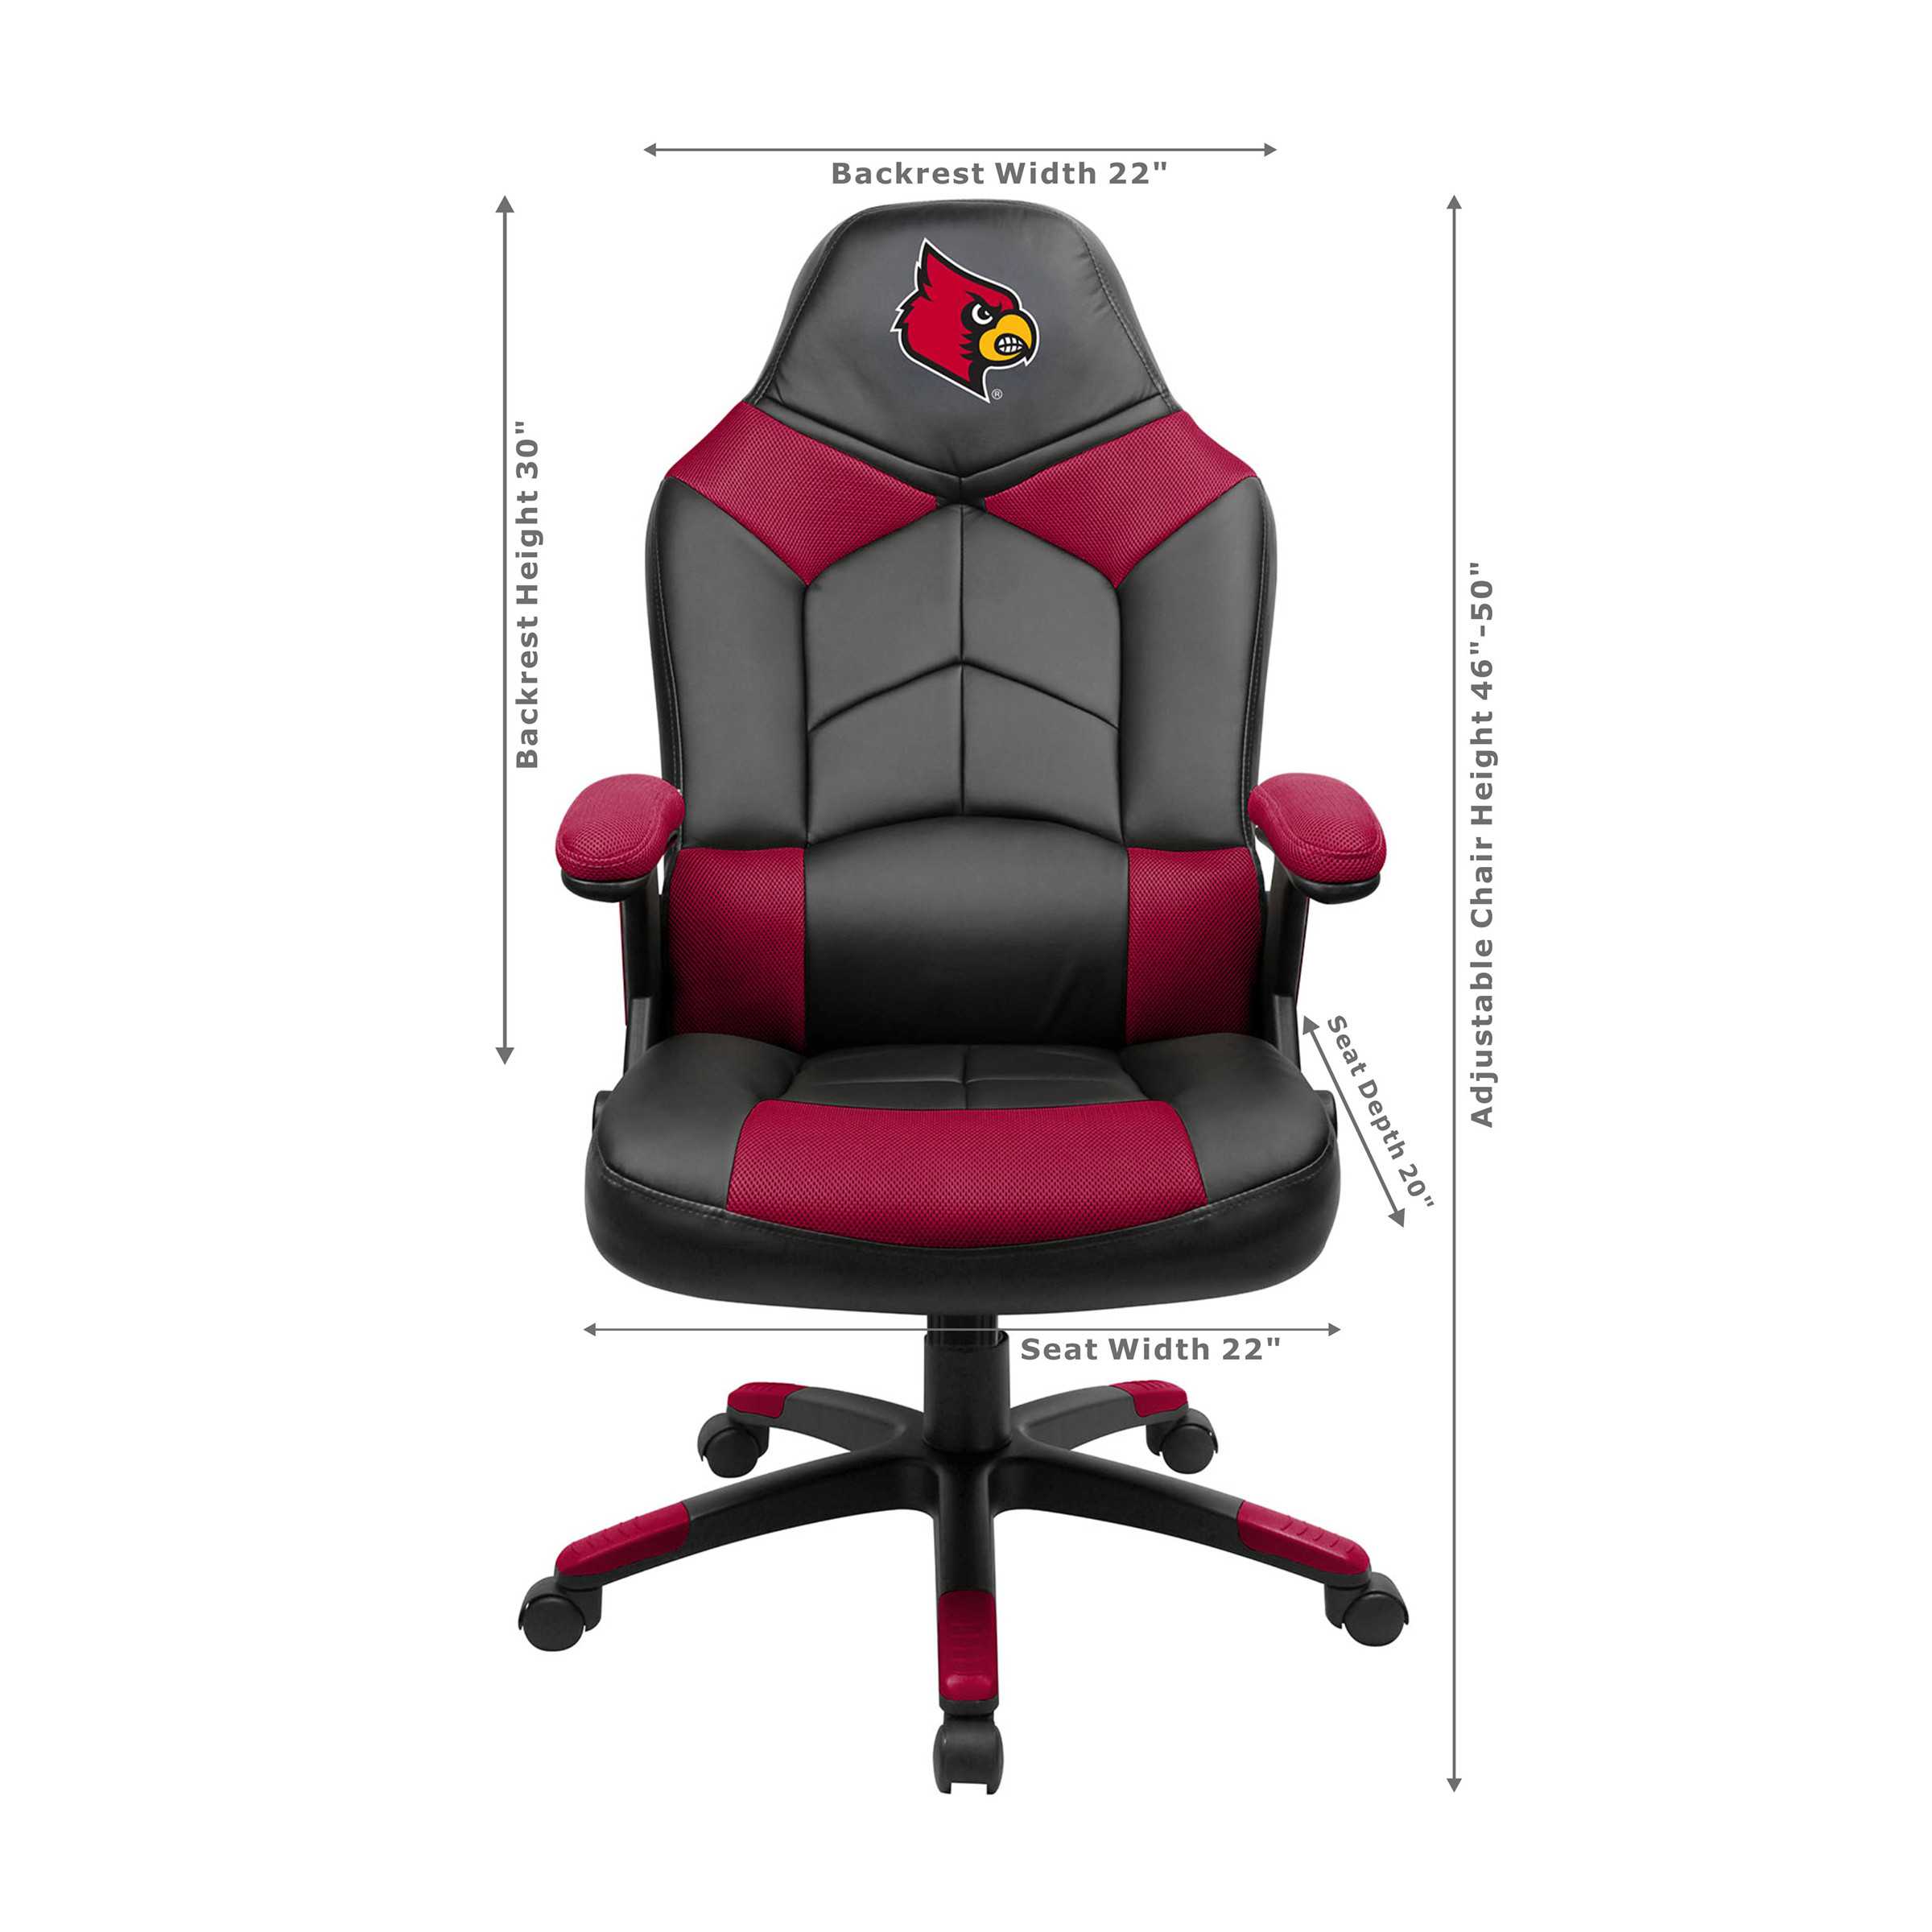 UNIVERSITY OF LOUISVILLE OVERSIZED GAMING CHAIR